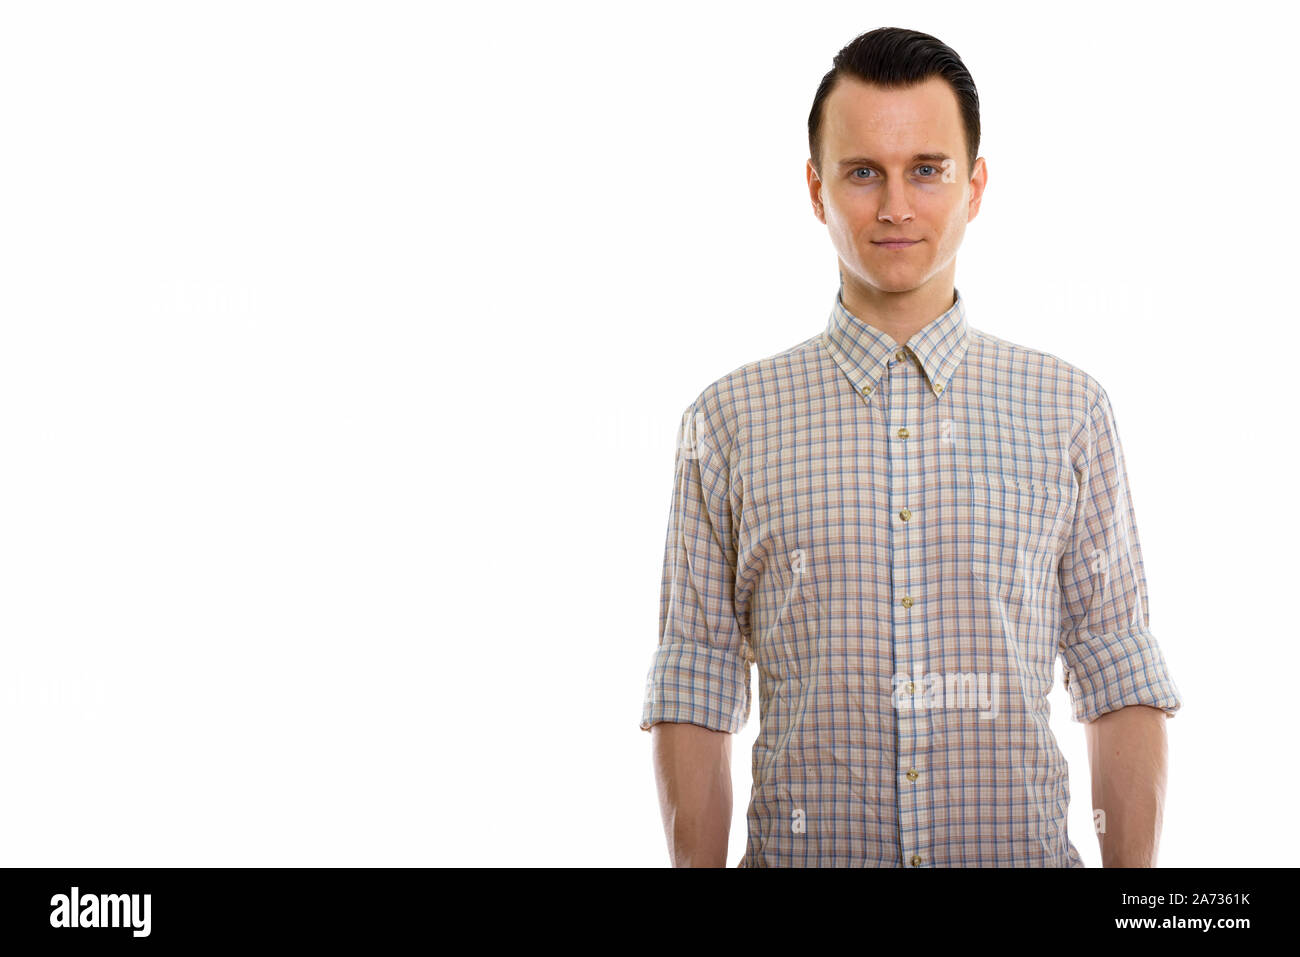 Portrait of young handsome man in smart casual clothing Stock Photo